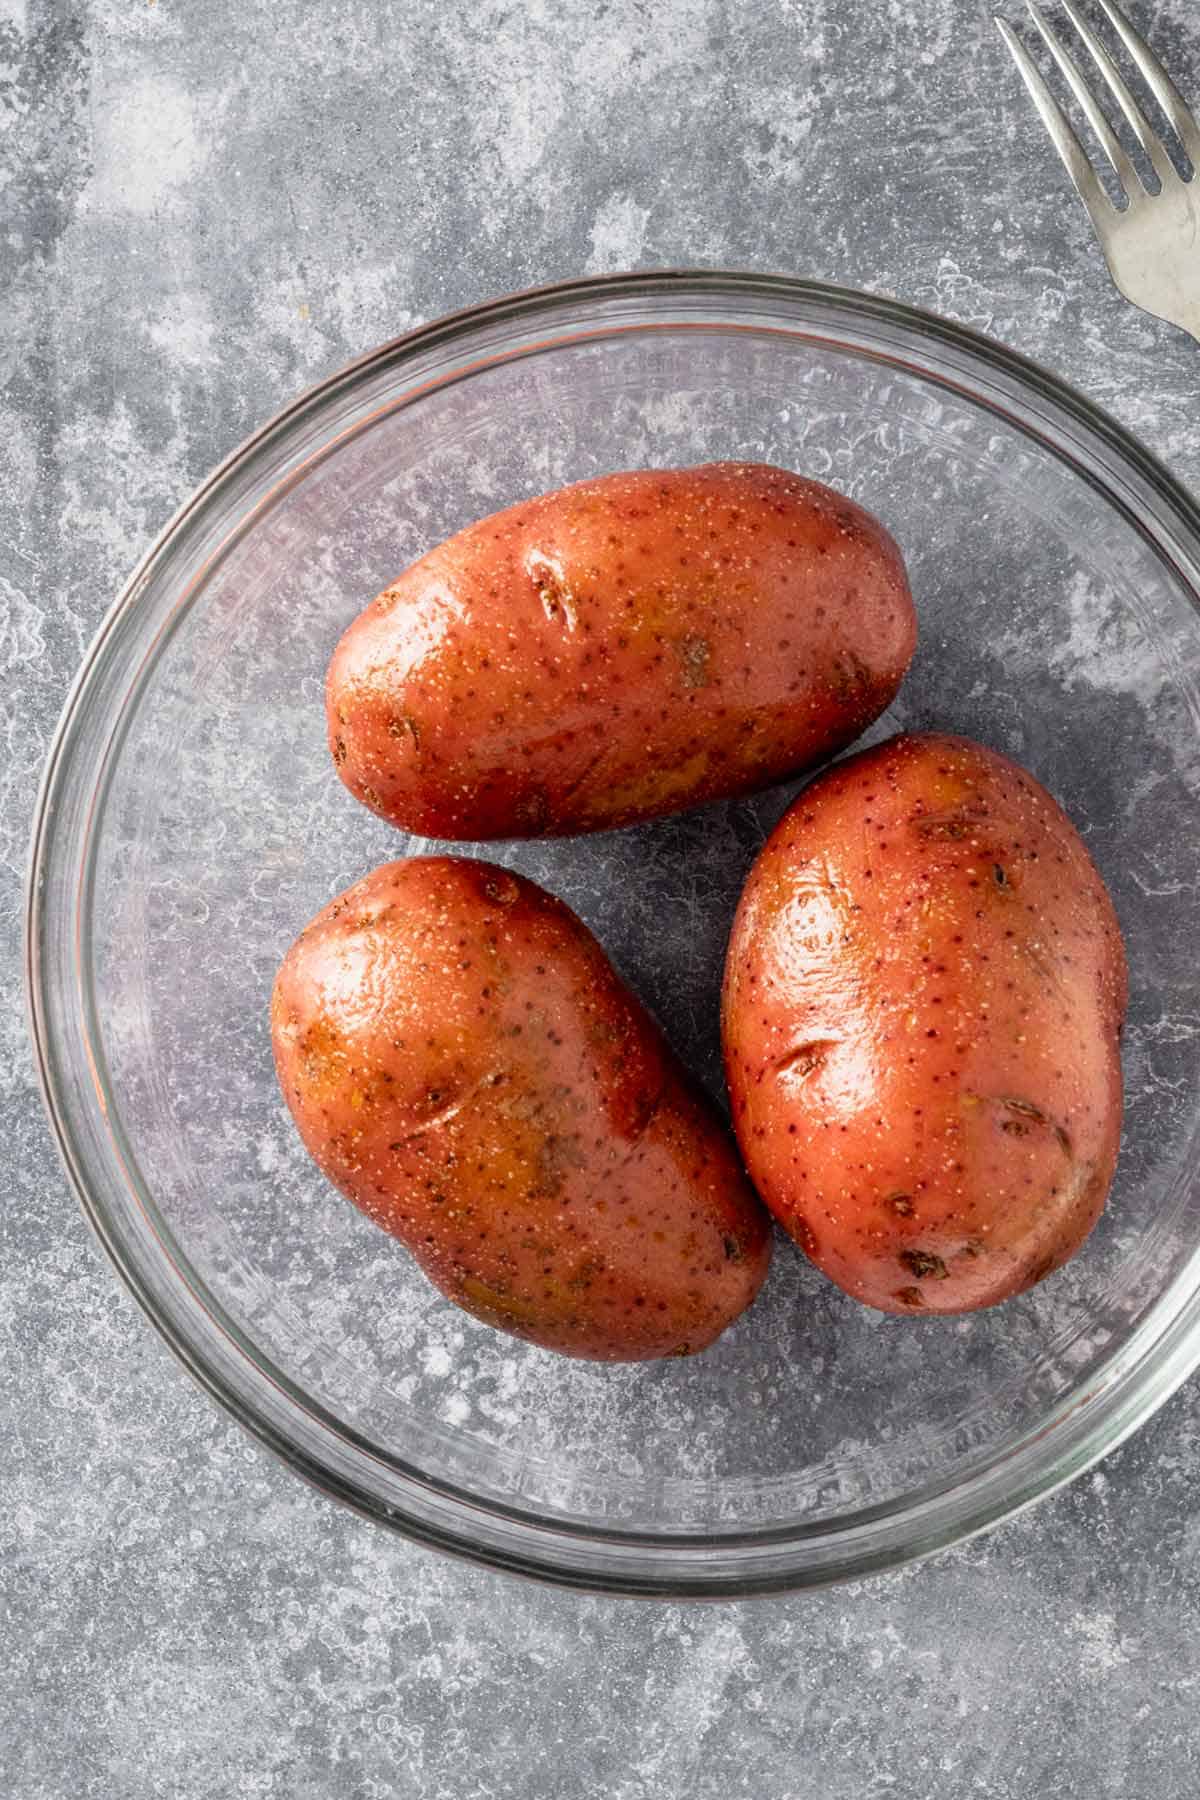 three whole potatoes with skins in a glass bowl.